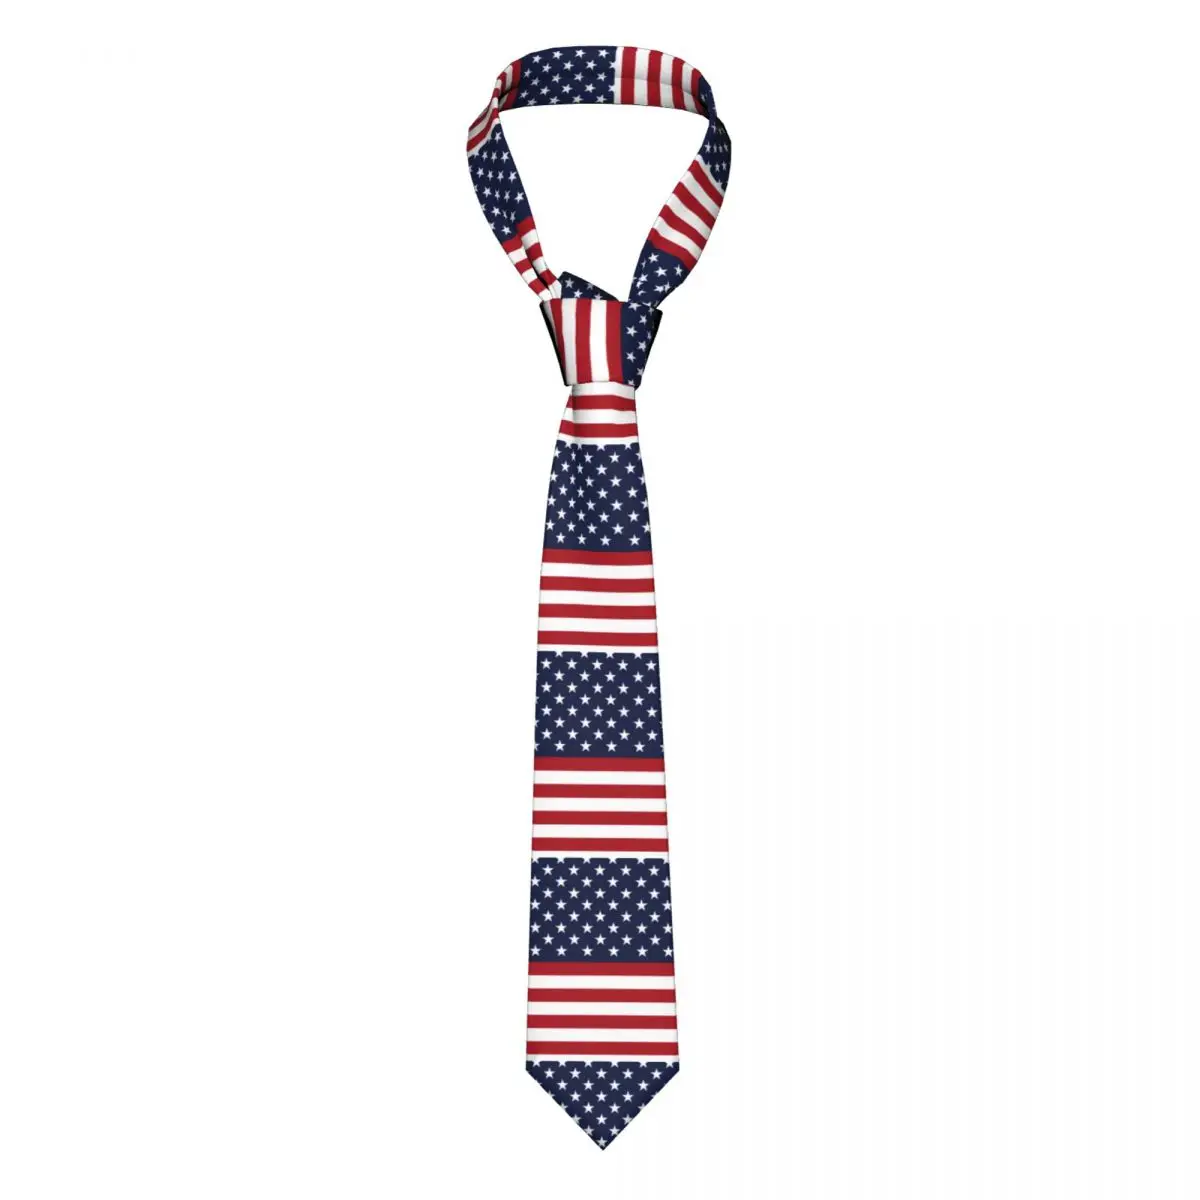 Red And White Striped Tie Stars Spangled USA Flag Formal Polyester Silk Neck Ties Men Accessories Blouse Fashion Cravat